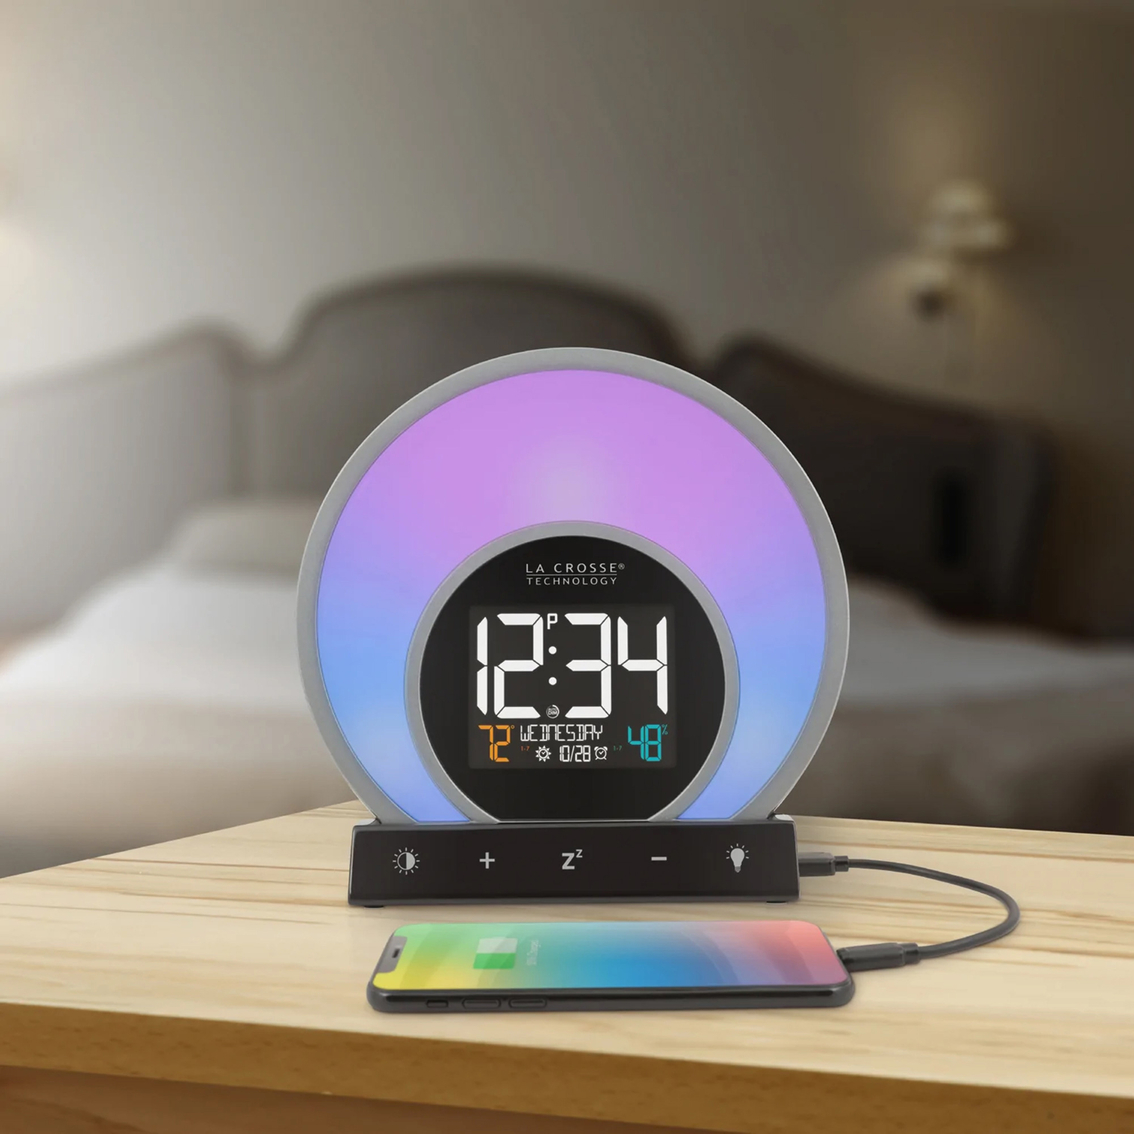 LaCrosse Soluna Light Alarm Clock with Temperature and Humidity - Image 2 of 2